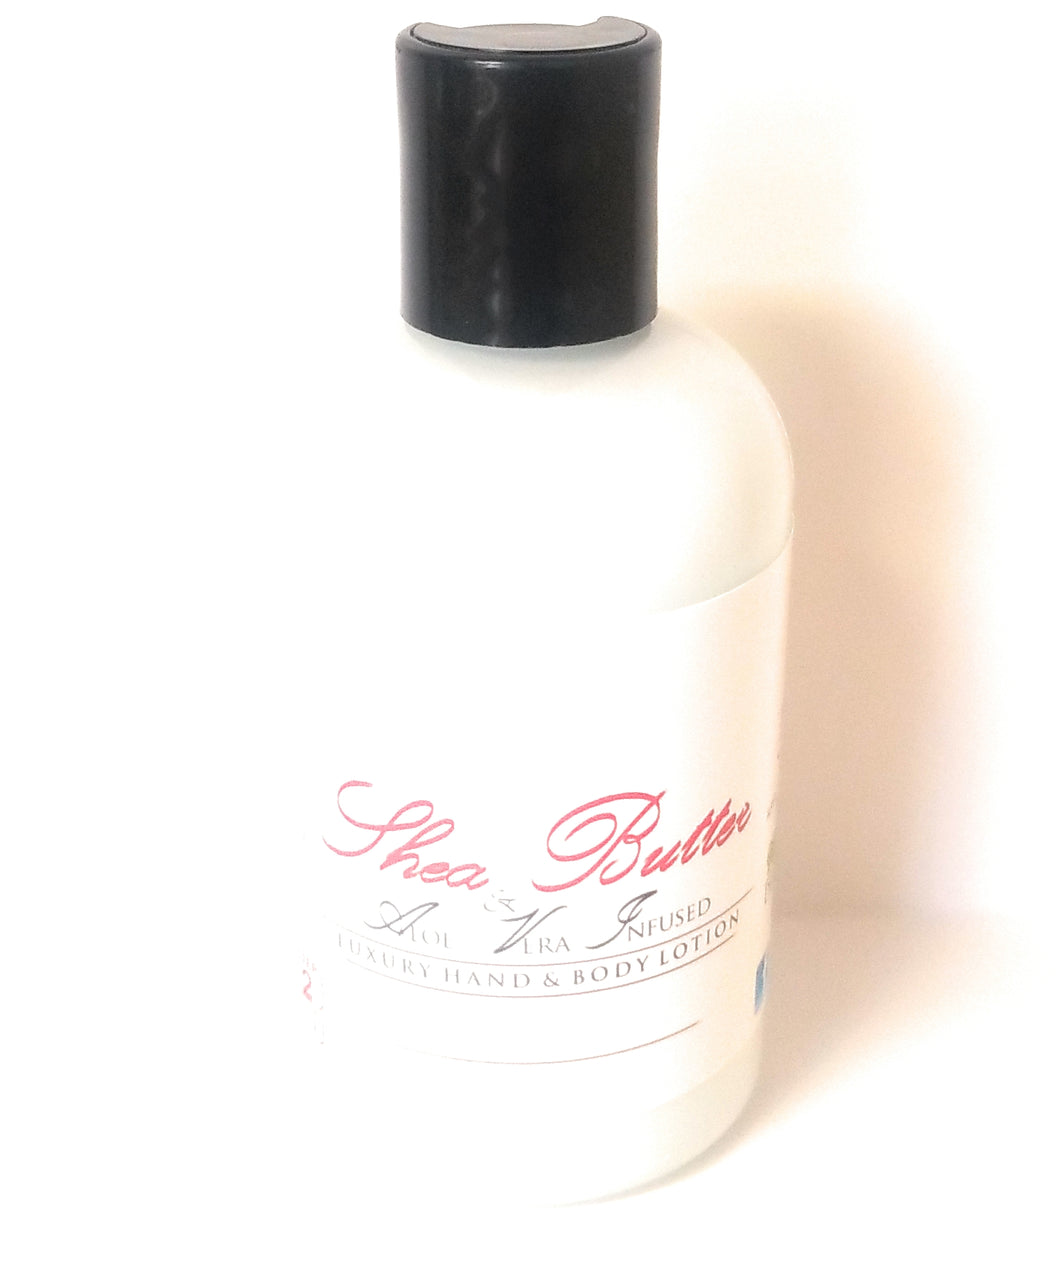 Our Impression of Gentlemen Boisee Givenchy 4oz Men Luxury Hand and Body Shea Butter Lotion